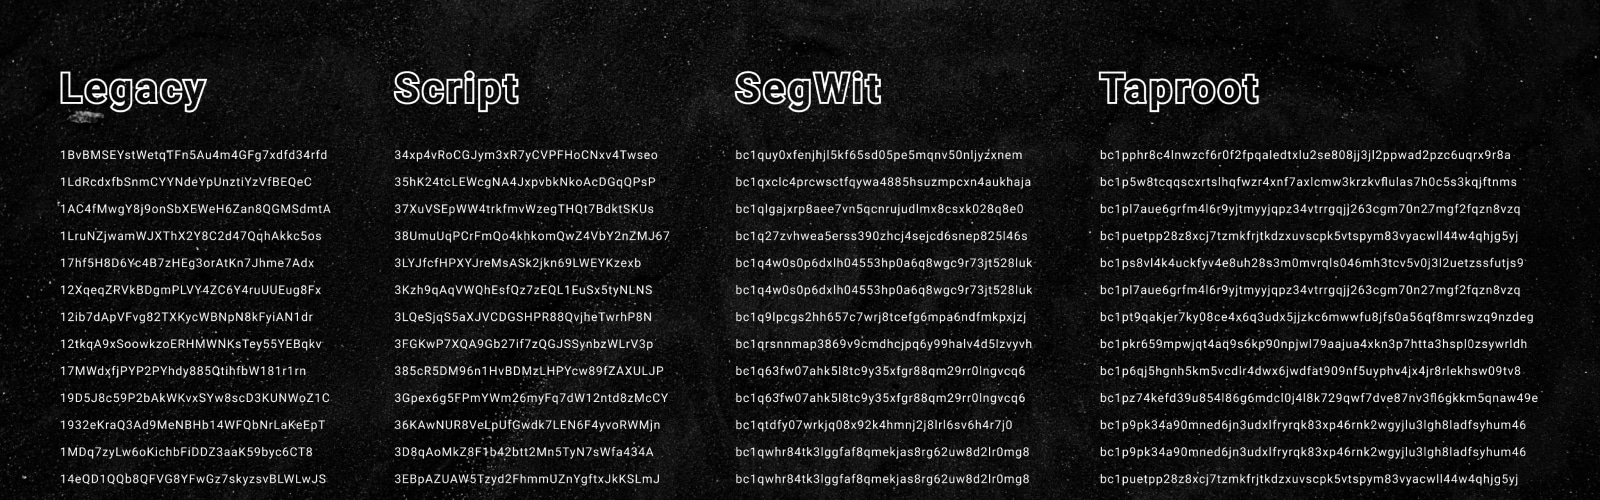 List of Wallets with Segwit Support | segwitlist